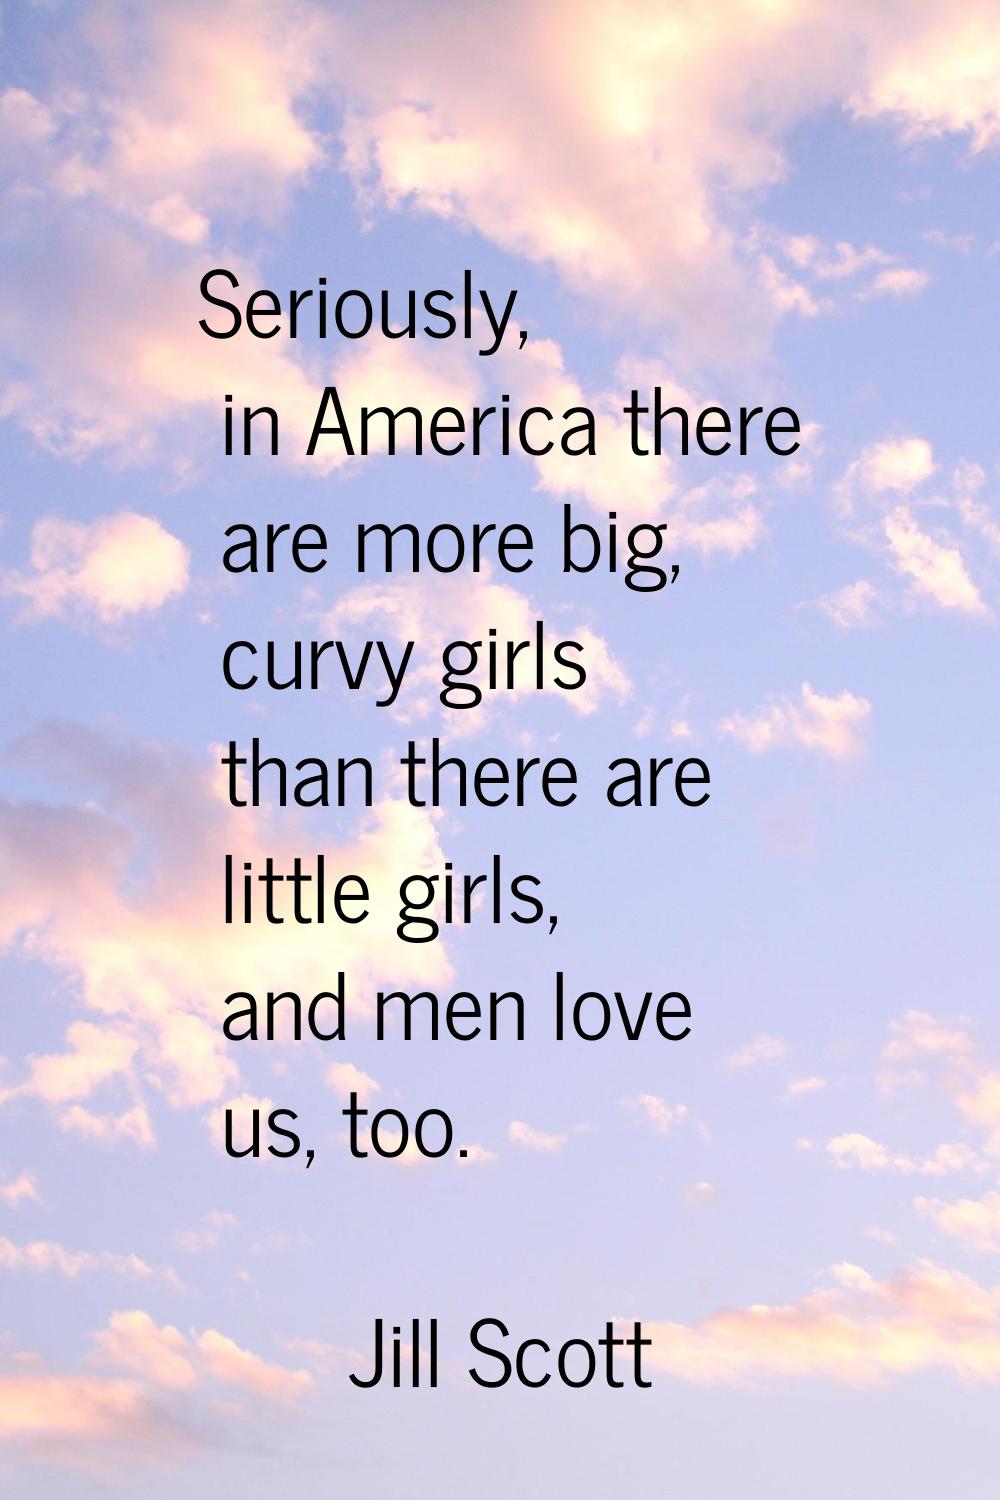 Seriously, in America there are more big, curvy girls than there are little girls, and men love us,